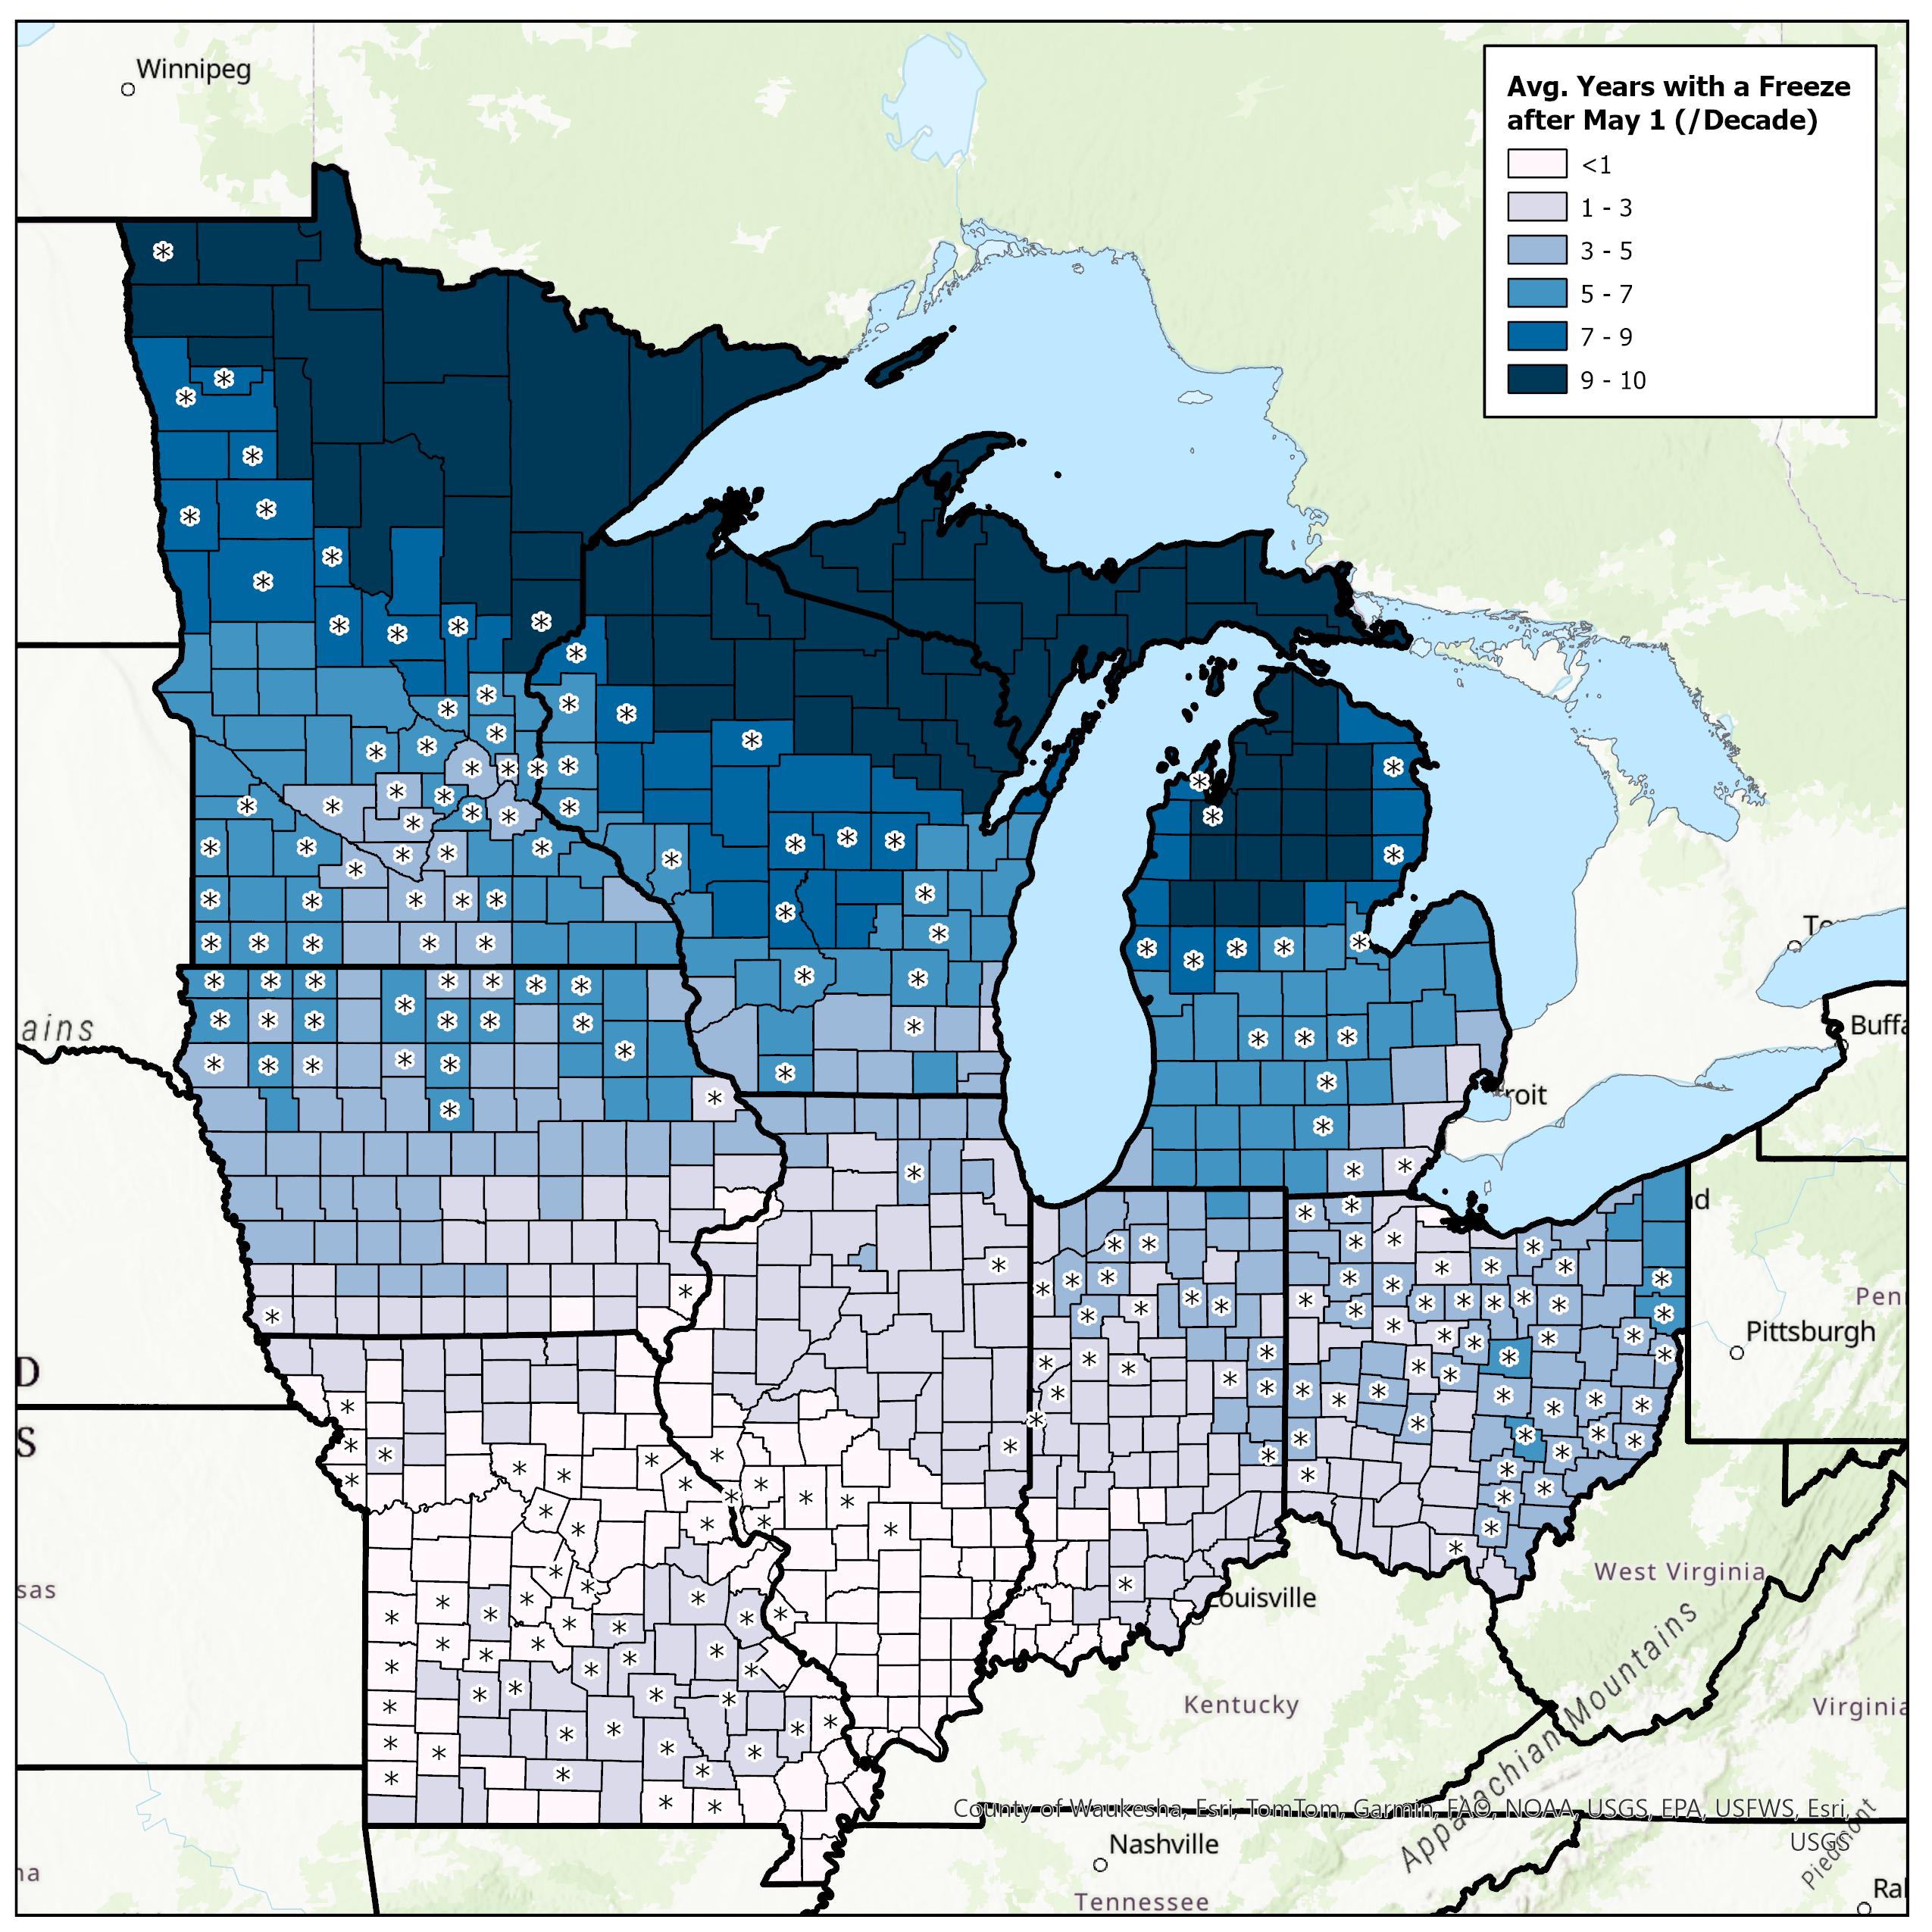 Map of the Midwest showing average freeze temperatures by county.